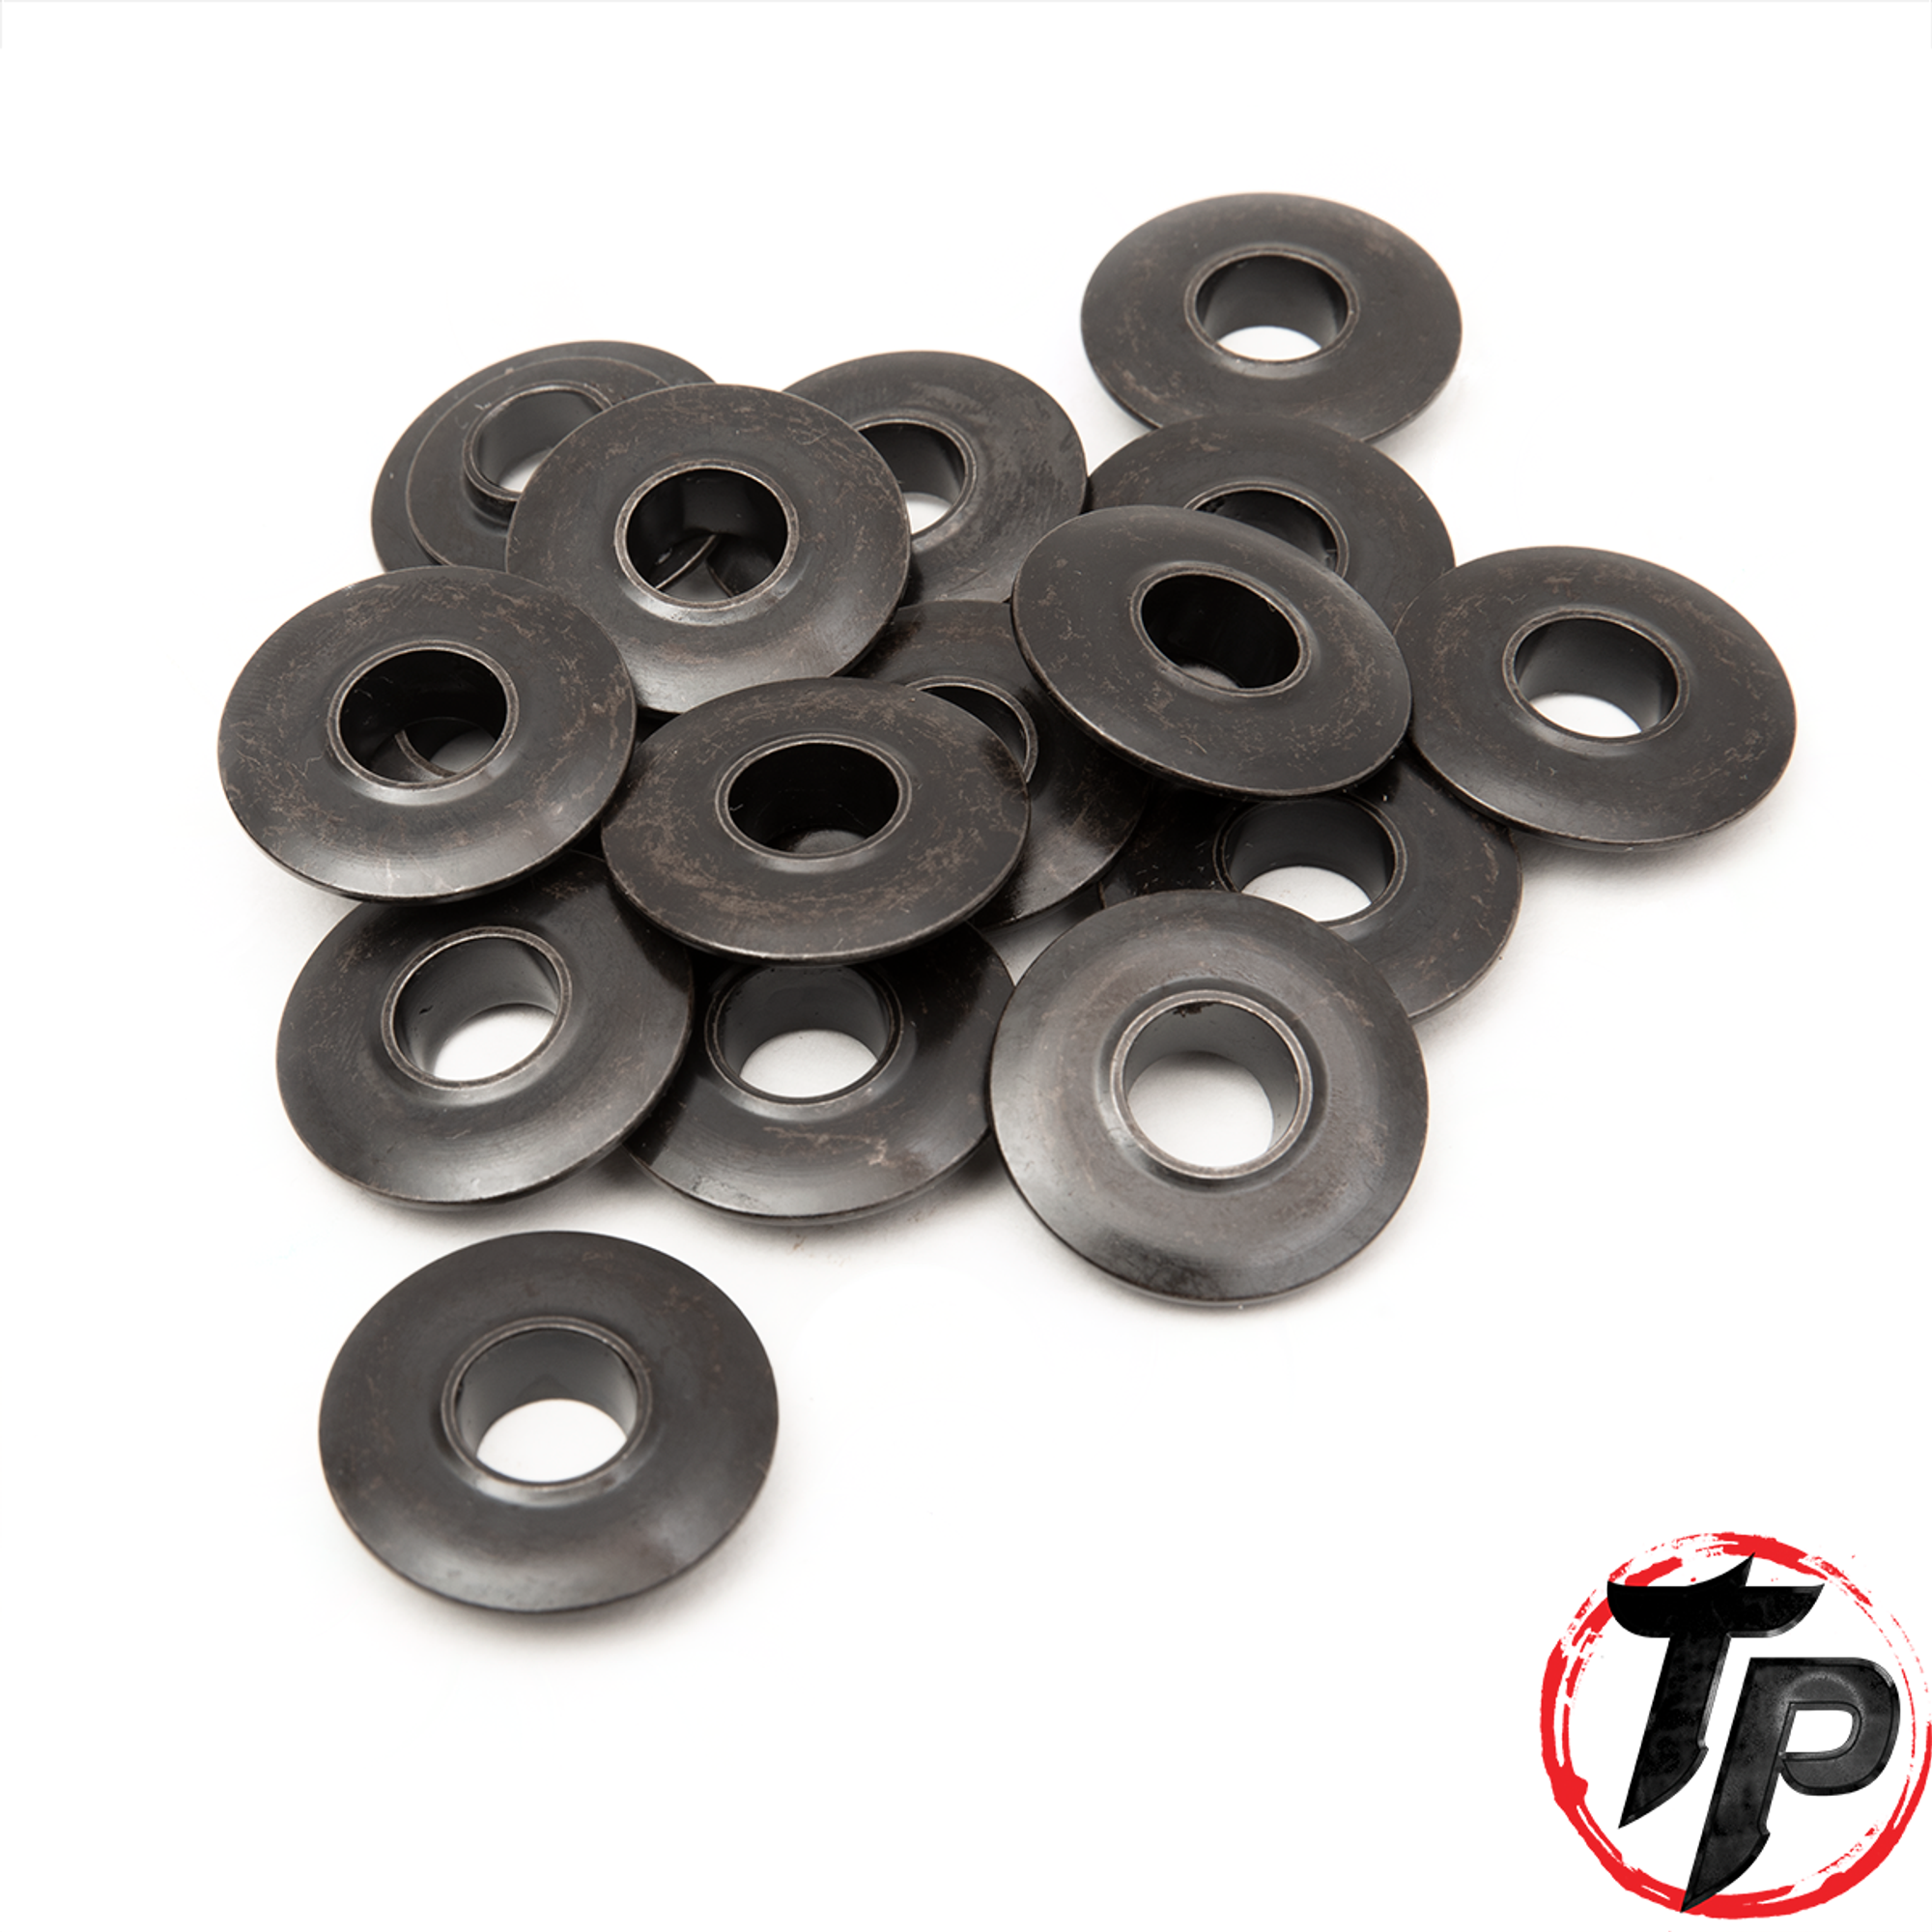 Steel Valve Spring Retainers For Platinum and Extreme Springs, Set of 16 Tick Pe